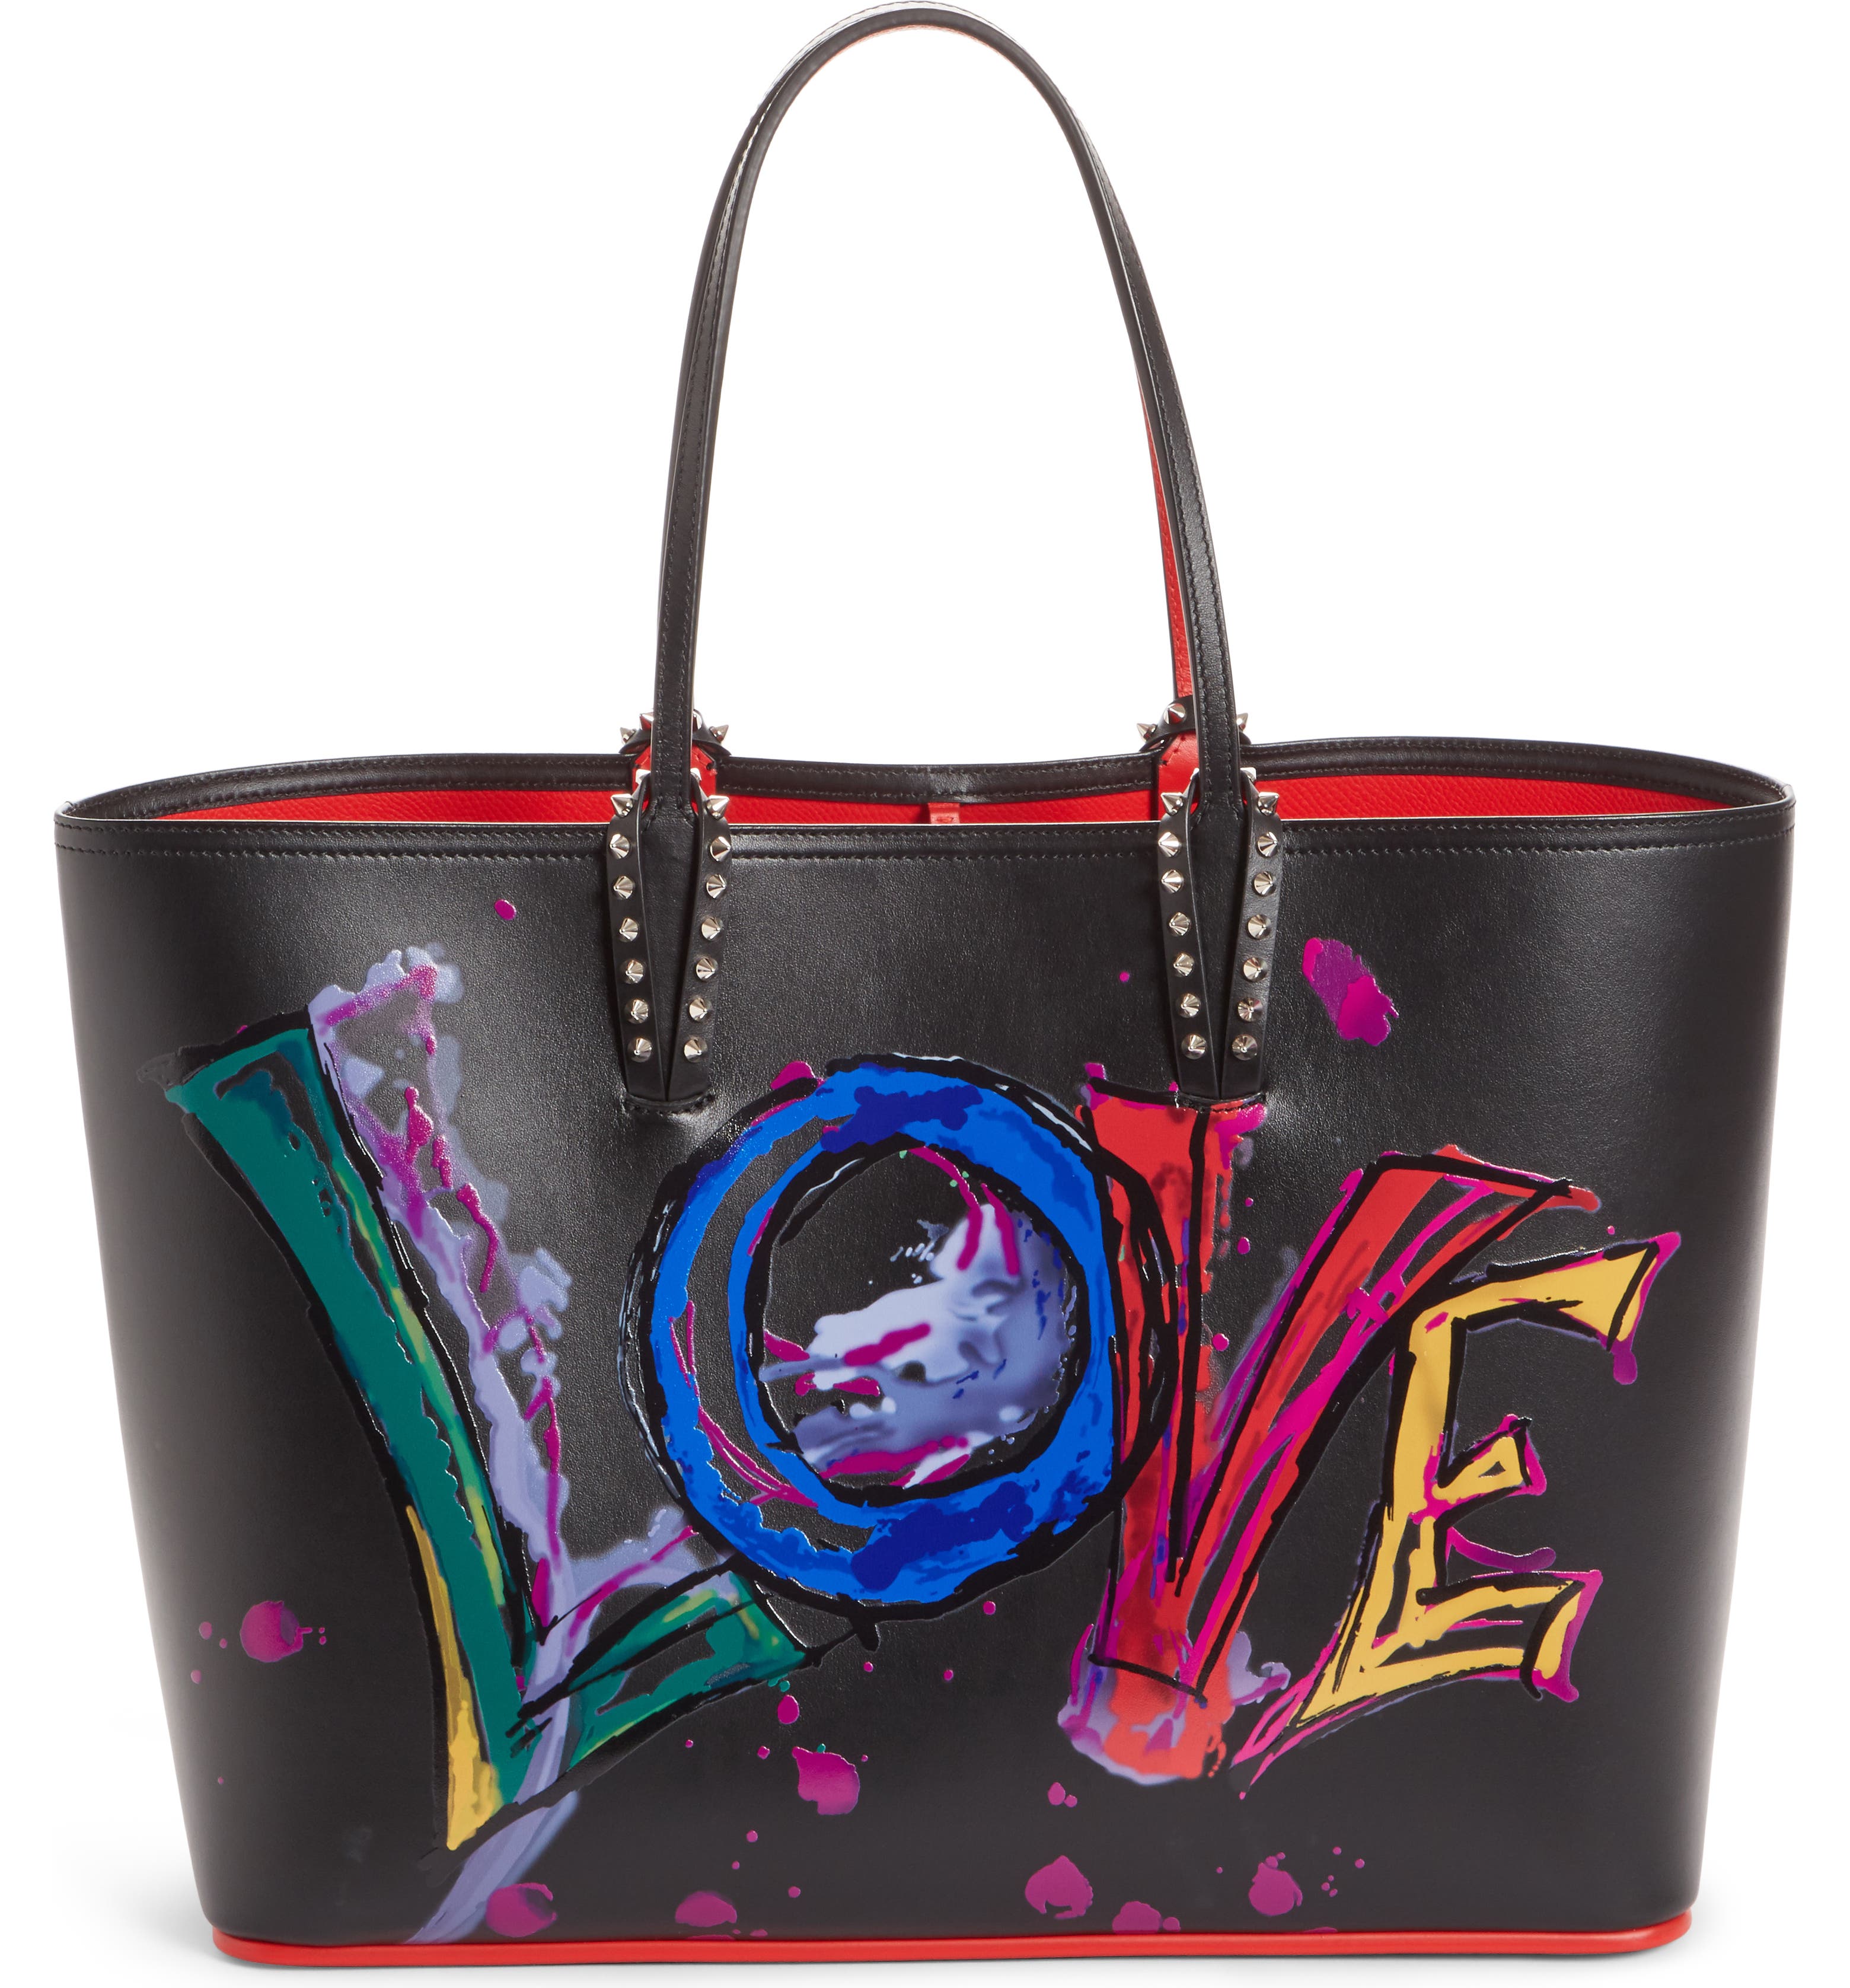 Christian Louboutin Cabata Paris Love Embellished Leather Tote | Nordstrom